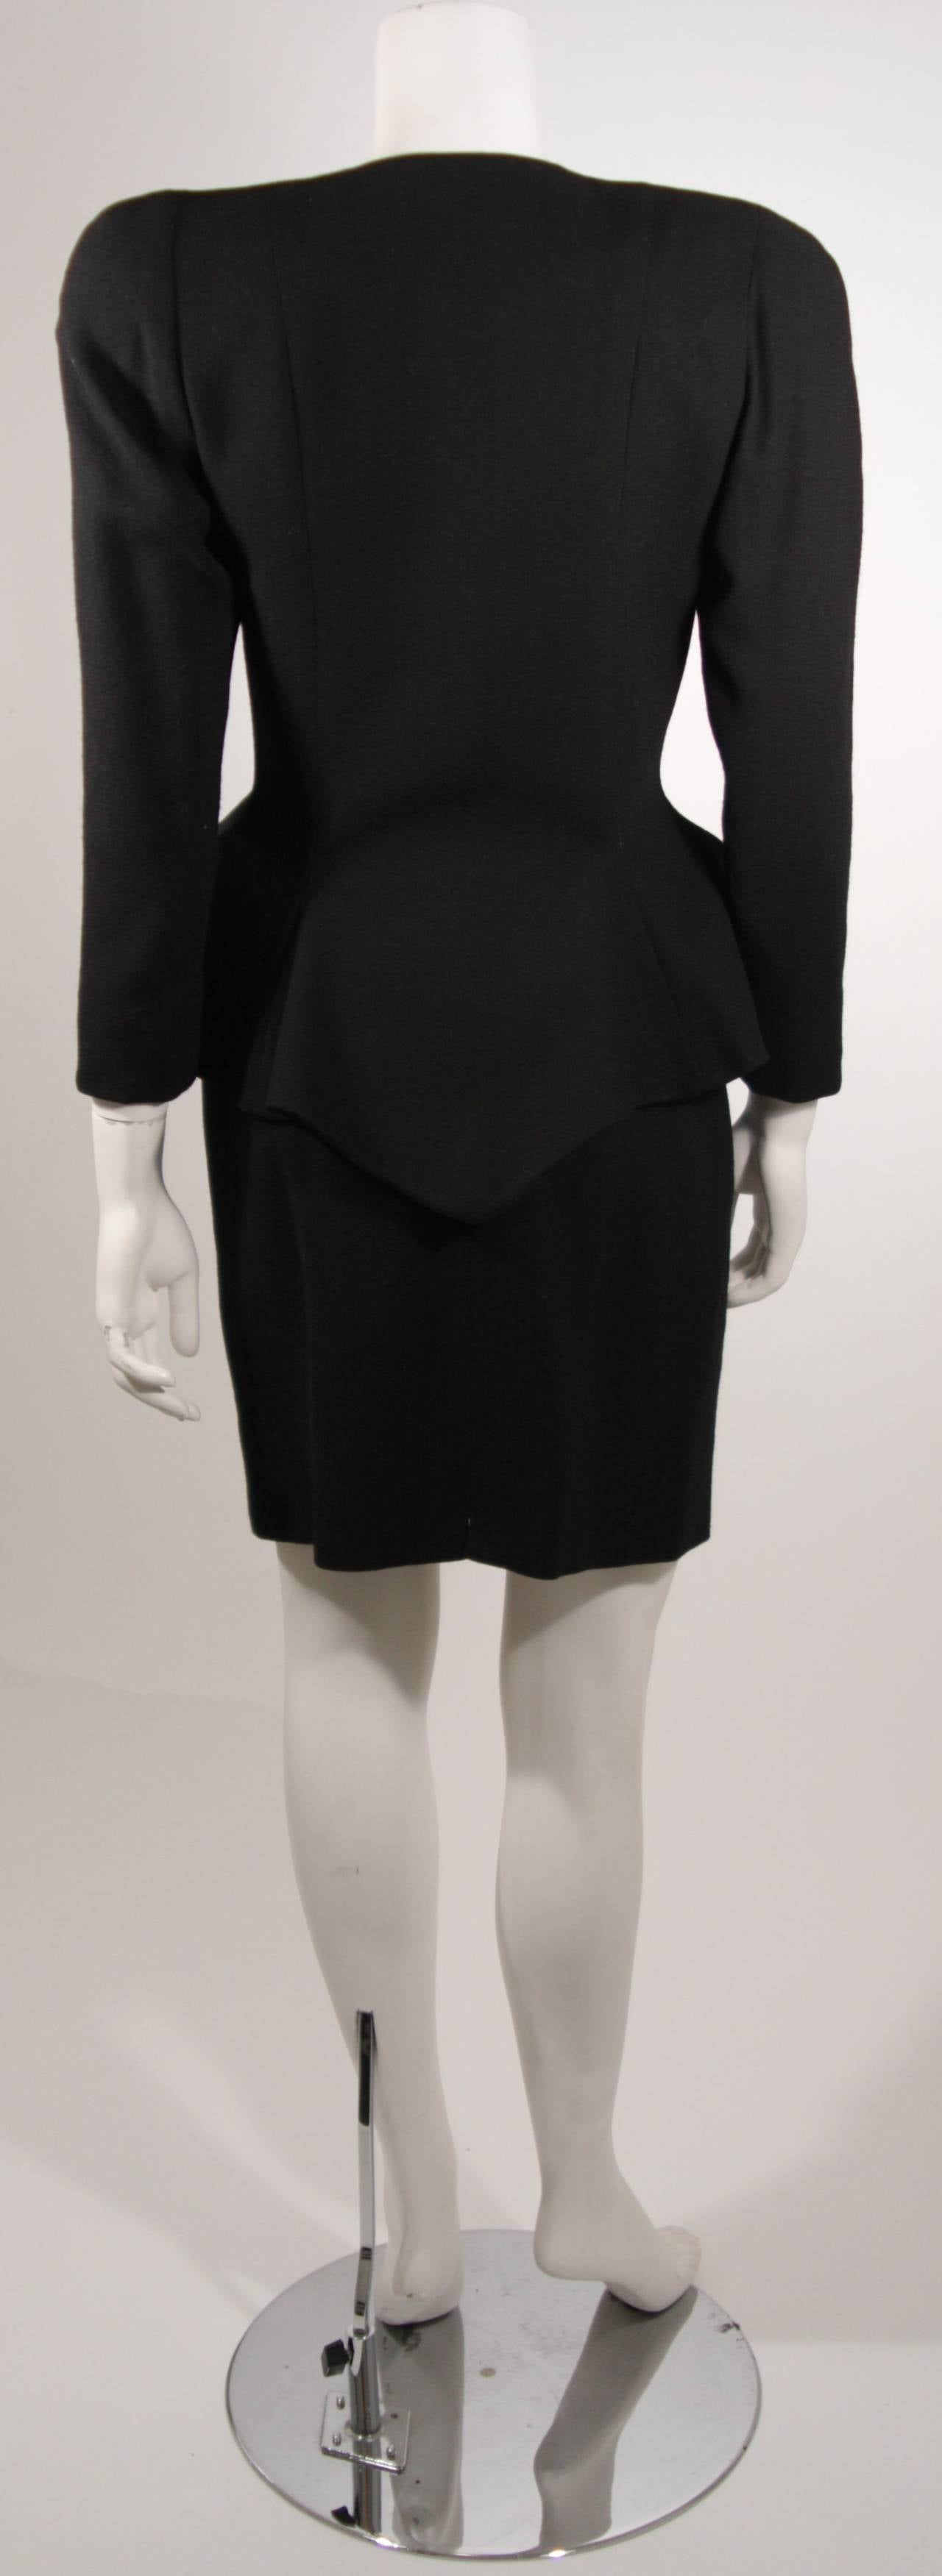 Travilla Black Structured Skirt Suit Size 8 For Sale 2